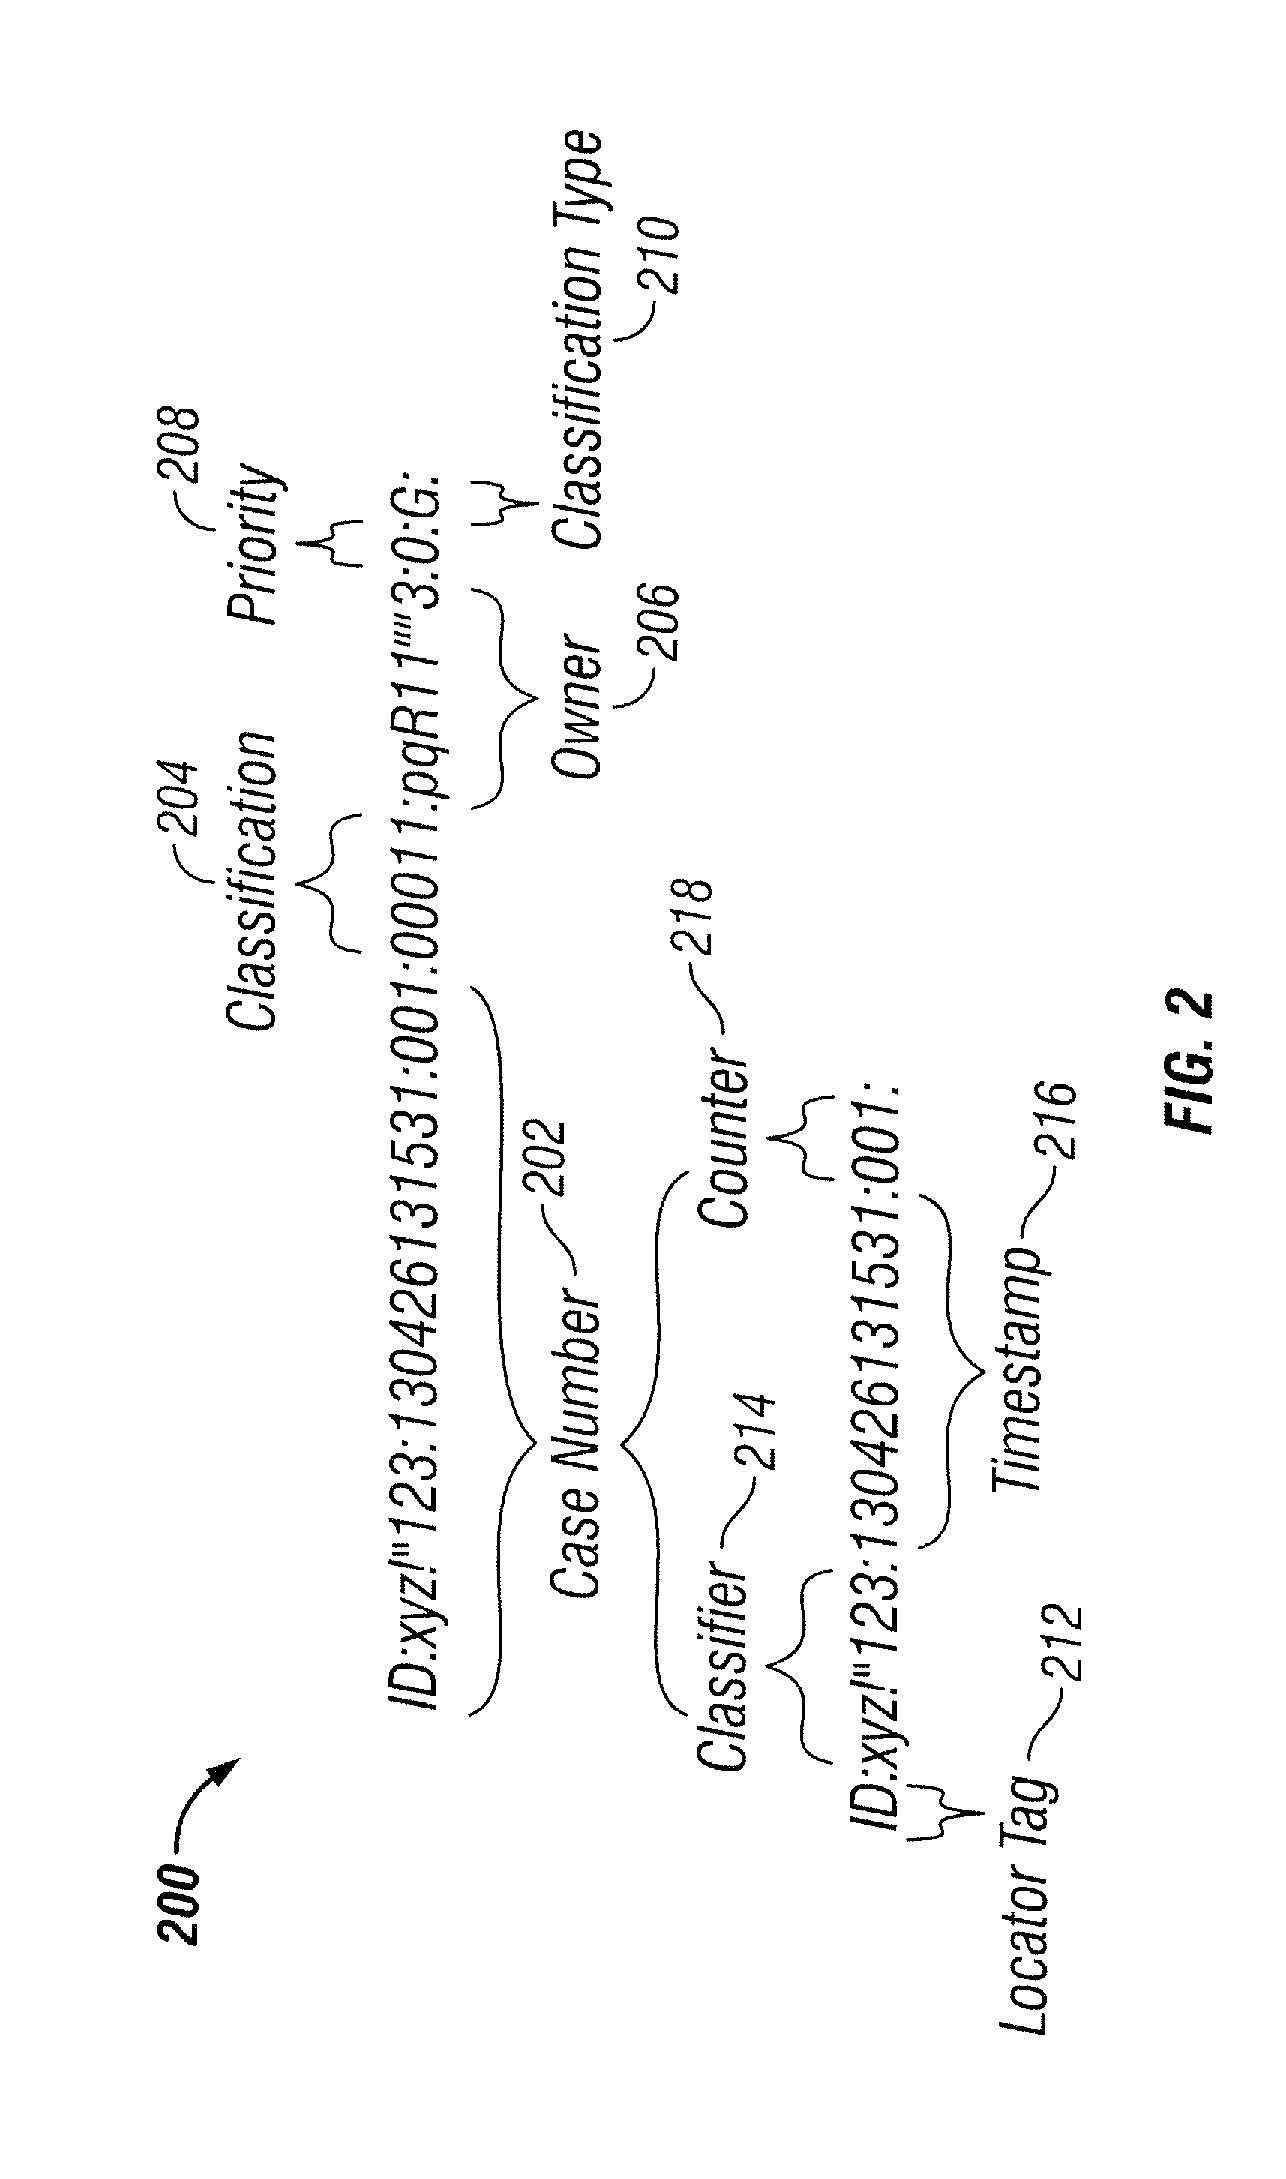 Communication and management of electronic mail classification information